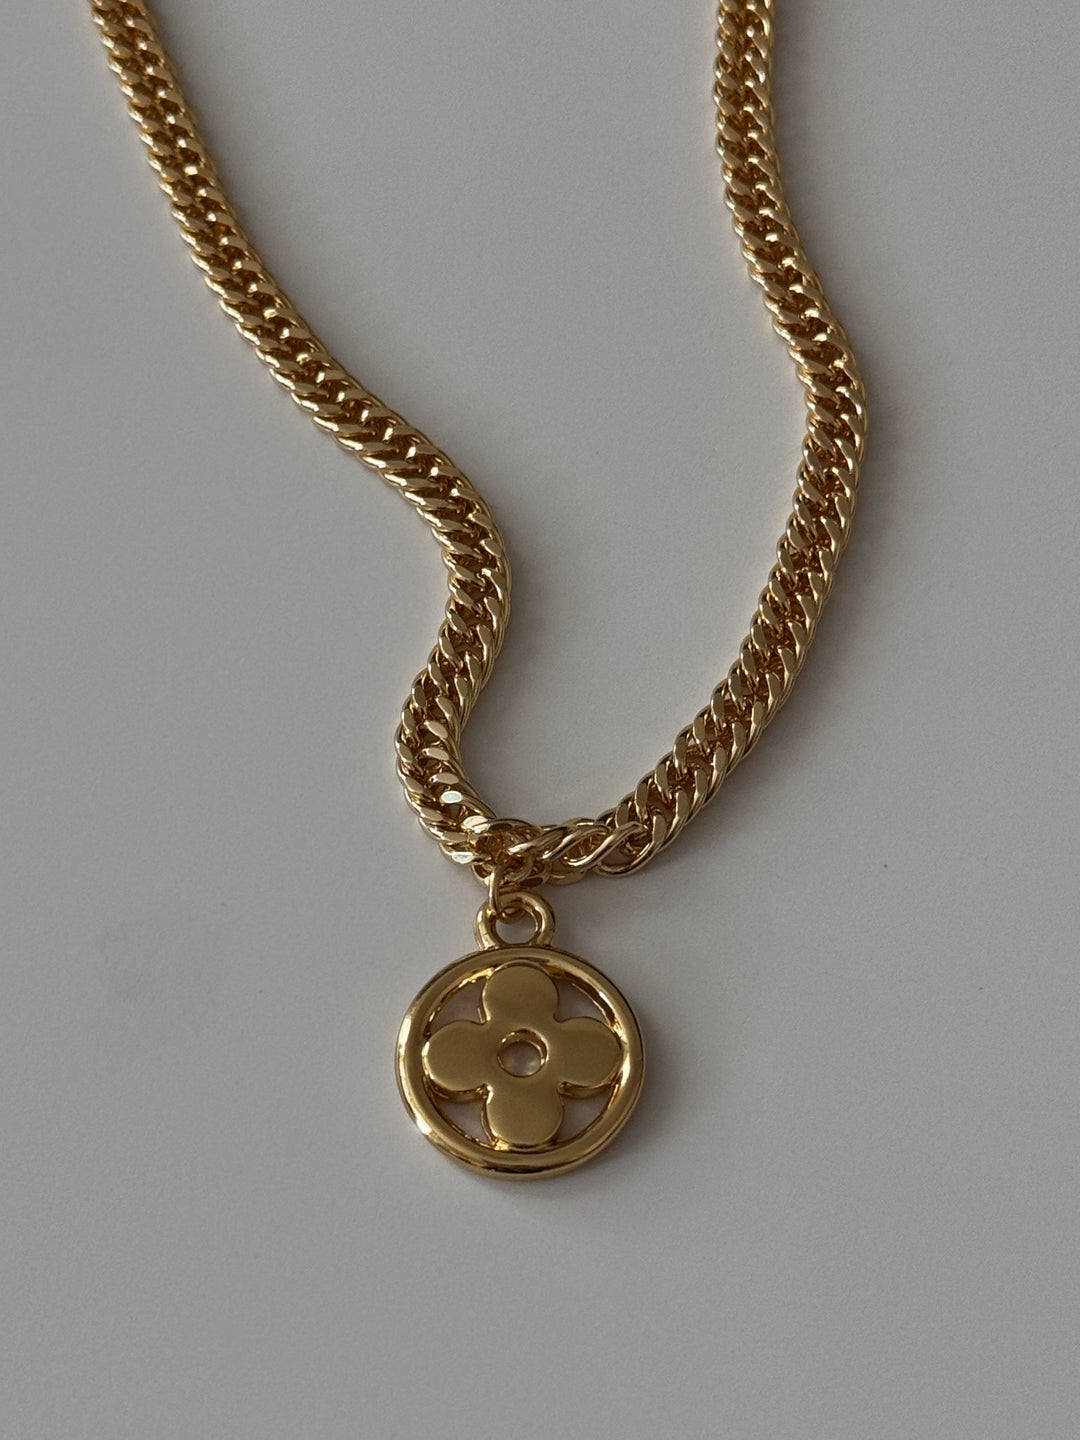 LV Clover Charm Necklace | reworked